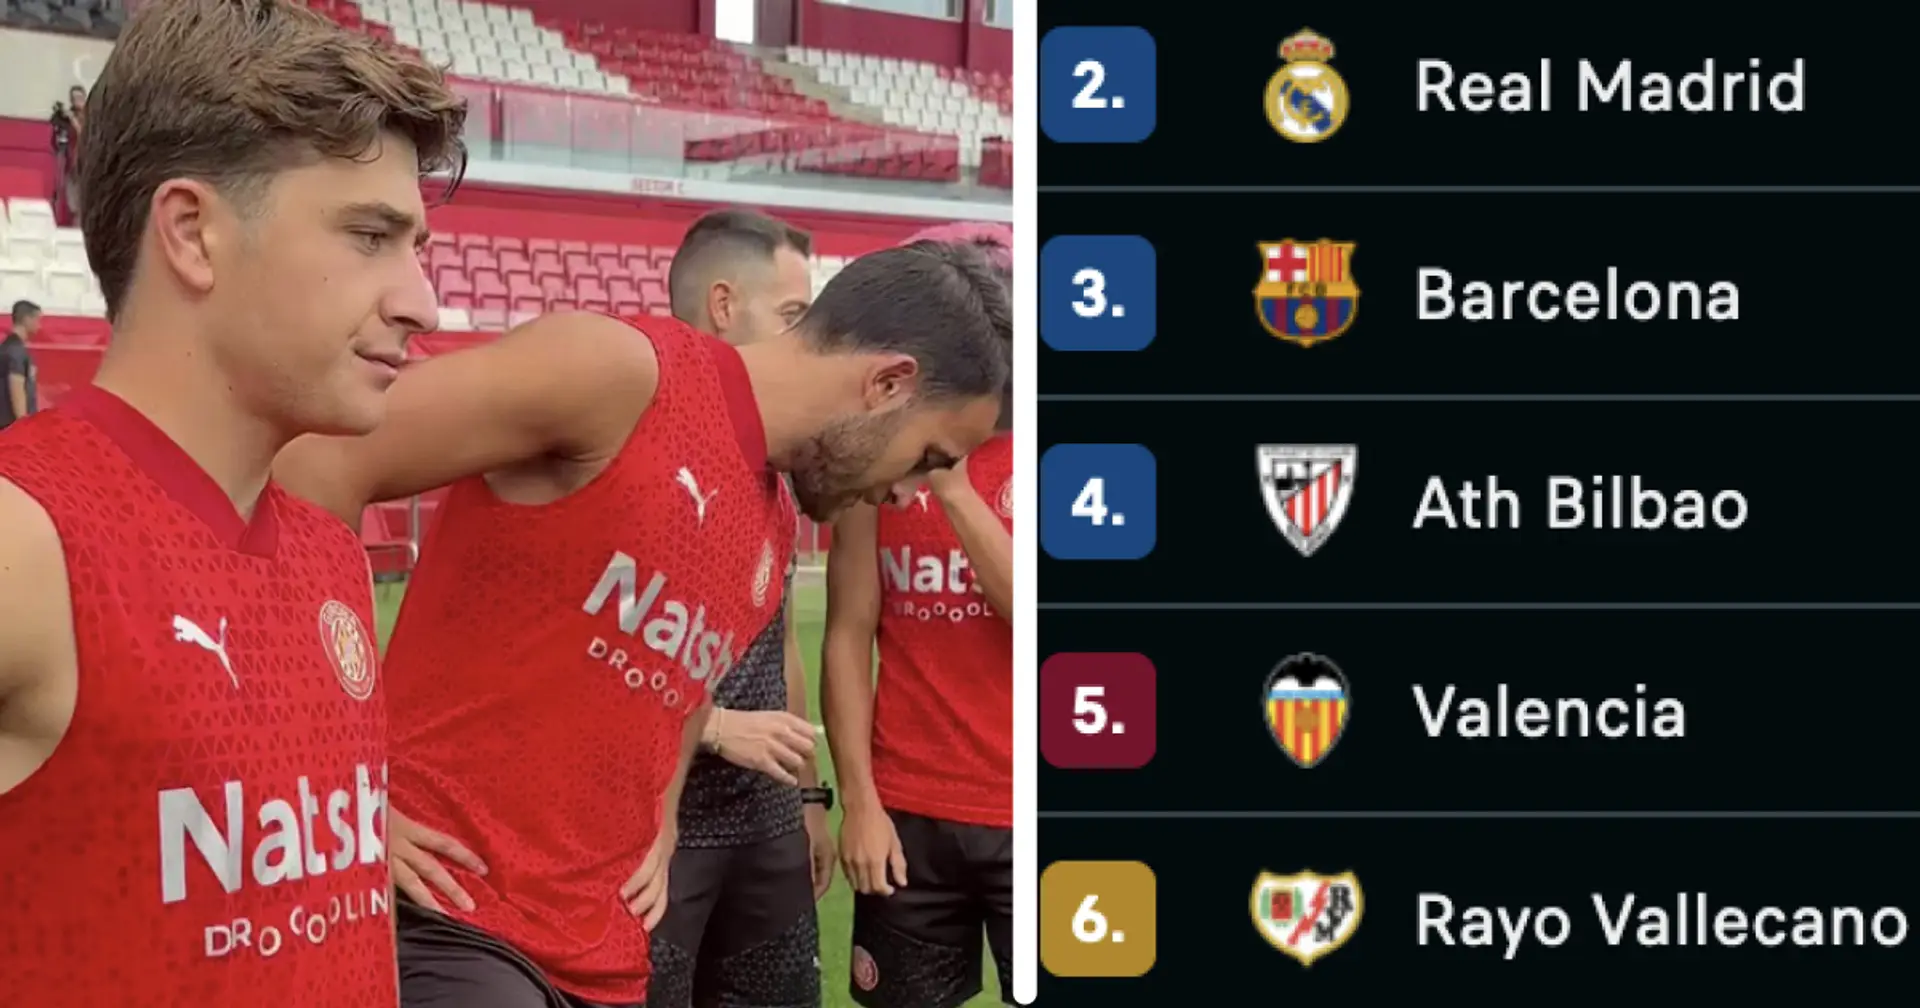 Club with 2 Barca players tops La Liga table – they also lead in goals scored